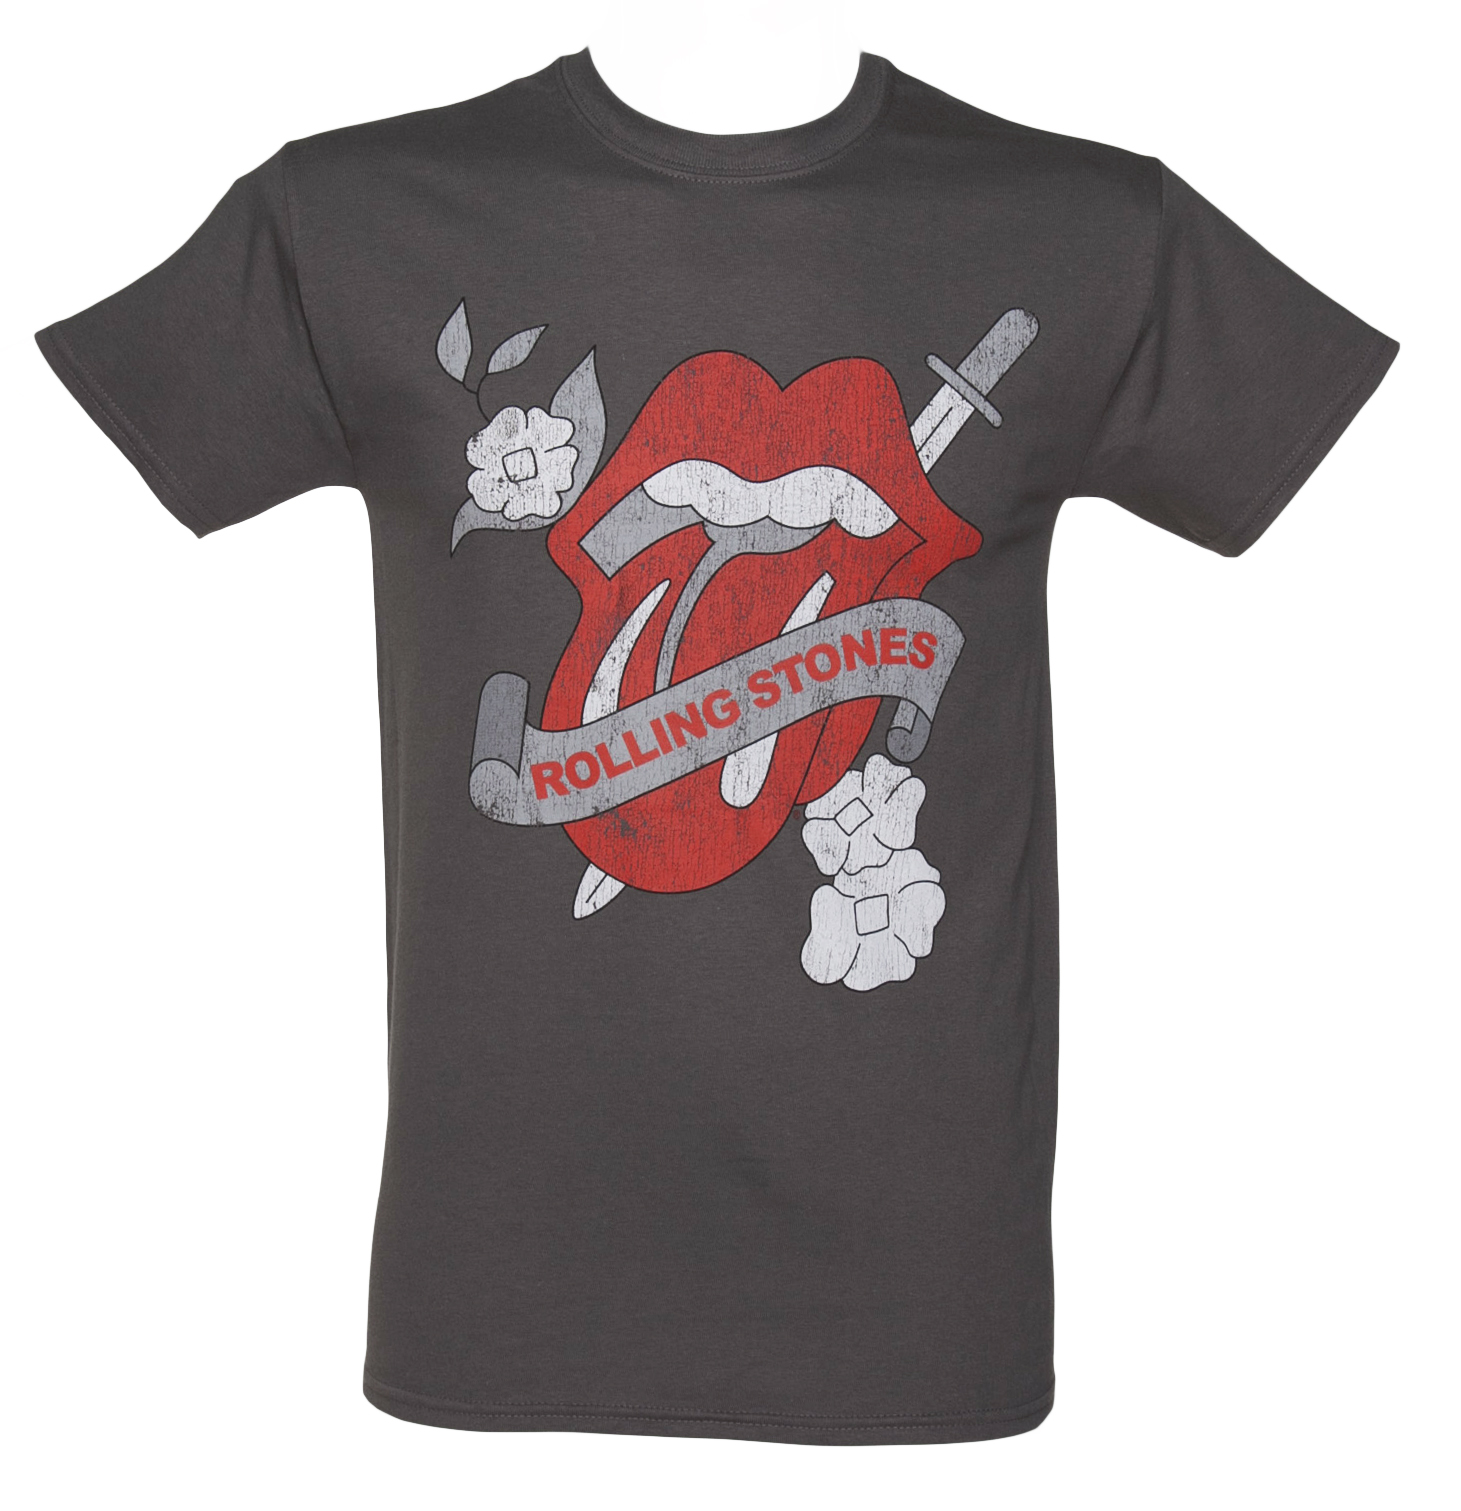 Charcoal Vintage Tattoo Rolling Stones